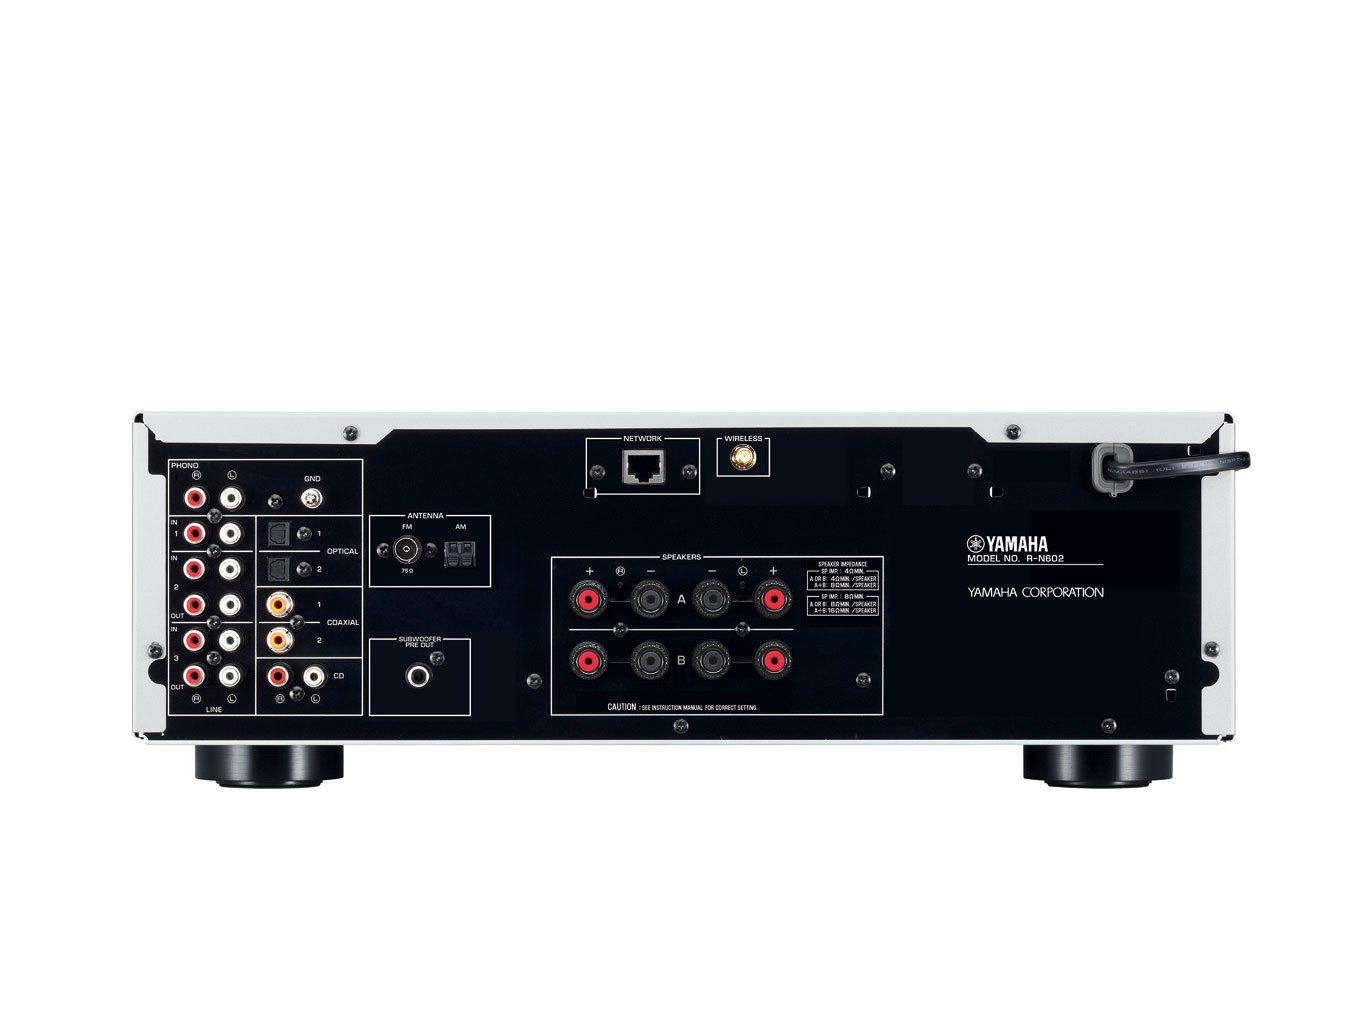 R-N602 - Overview - Hi-Fi Components - Audio & Visual - Products